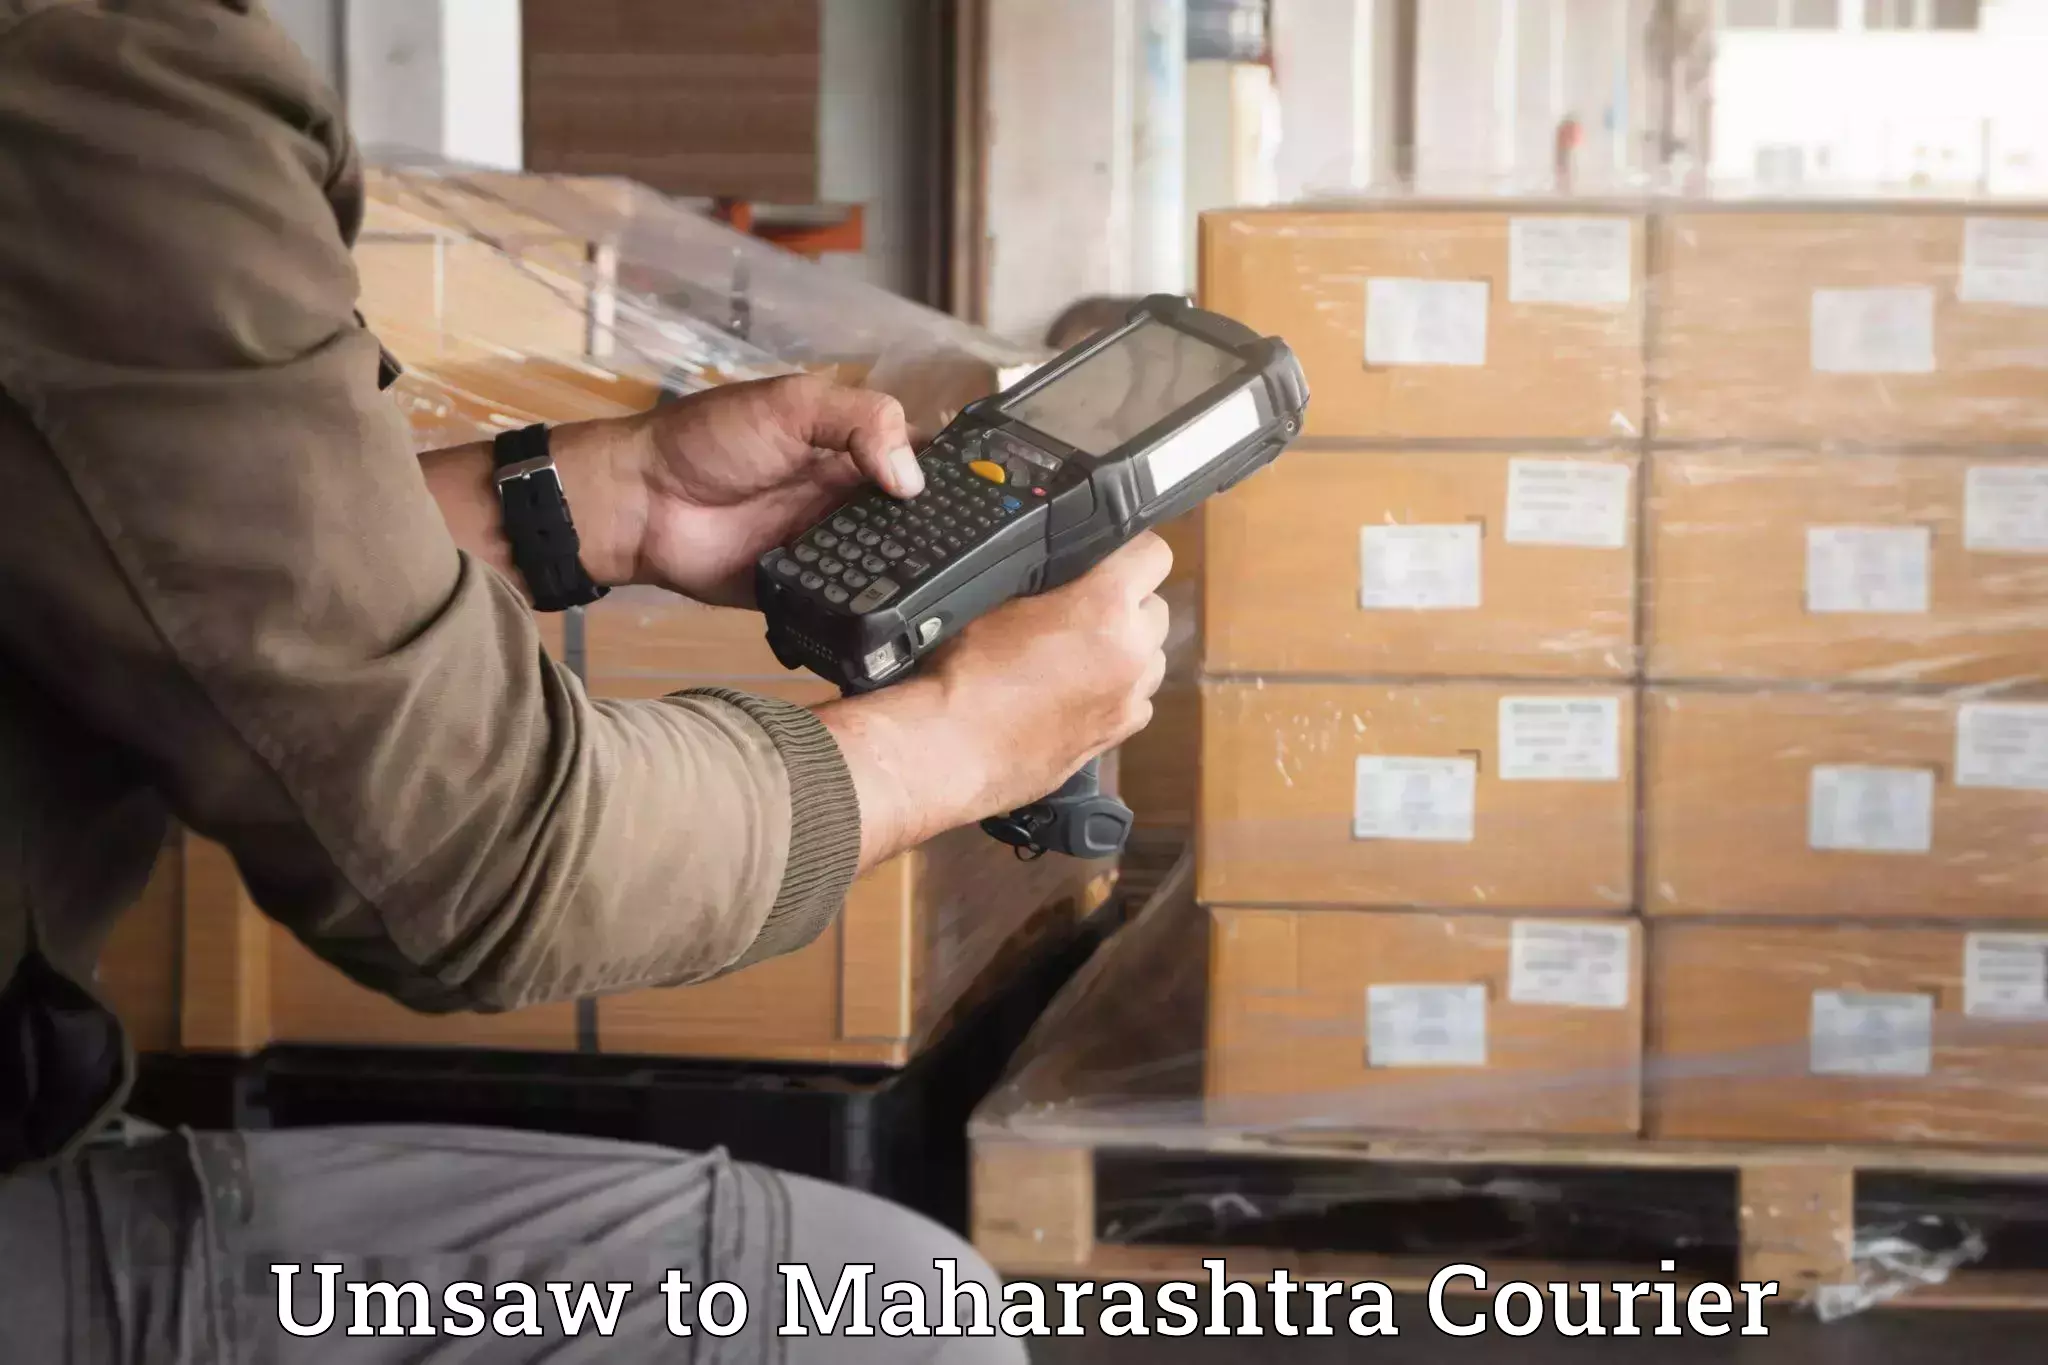 Moving and packing experts Umsaw to Maharashtra